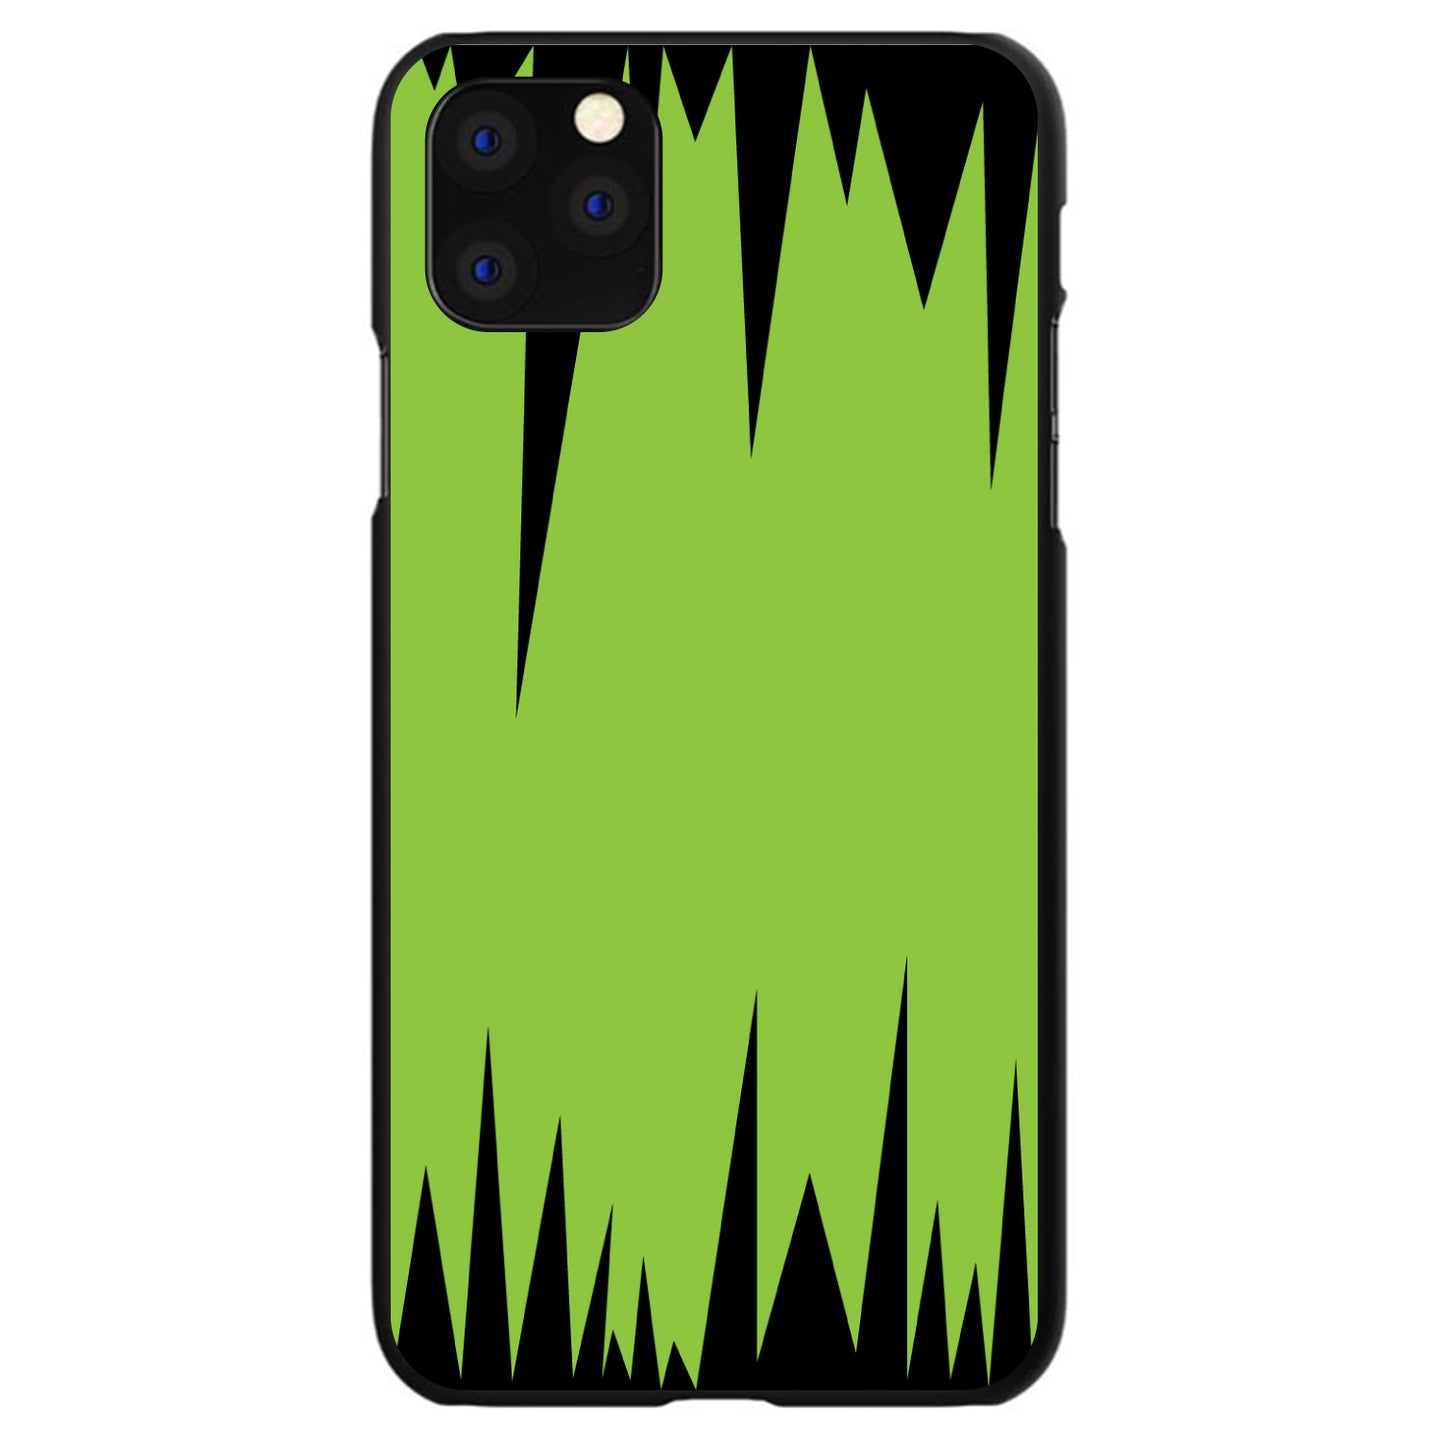 DistinctInk® Hard Plastic Snap-On Case for Apple iPhone or Samsung Galaxy - Lime Green Black Spikes